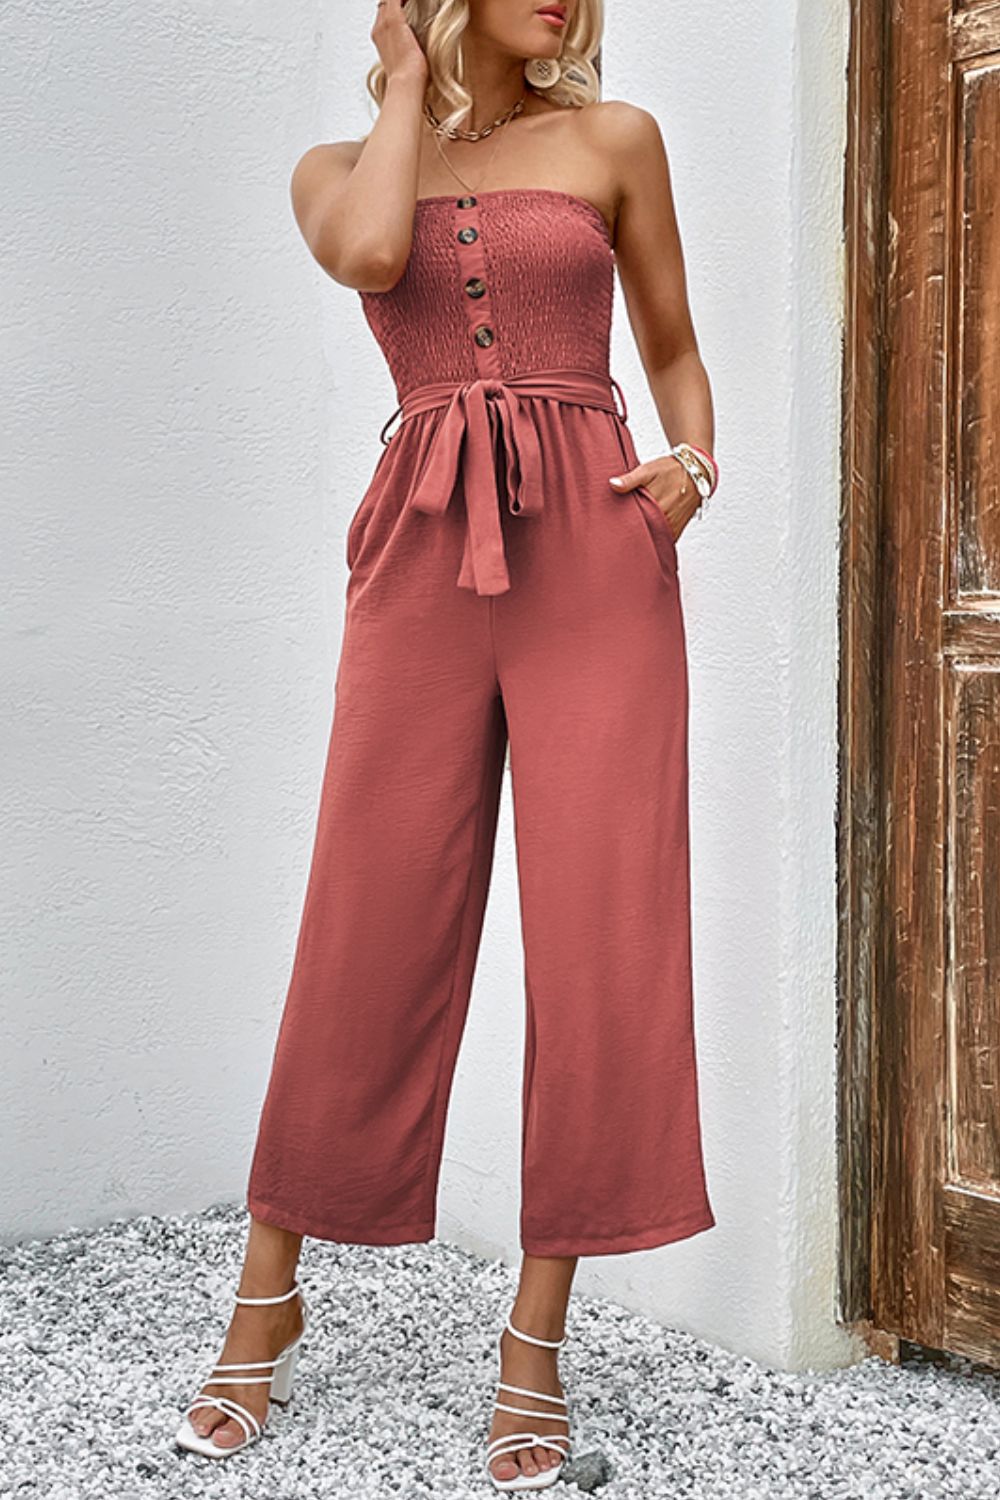 Decorative Button Strapless Smocked Jumpsuit with Pockets by Coco Charli